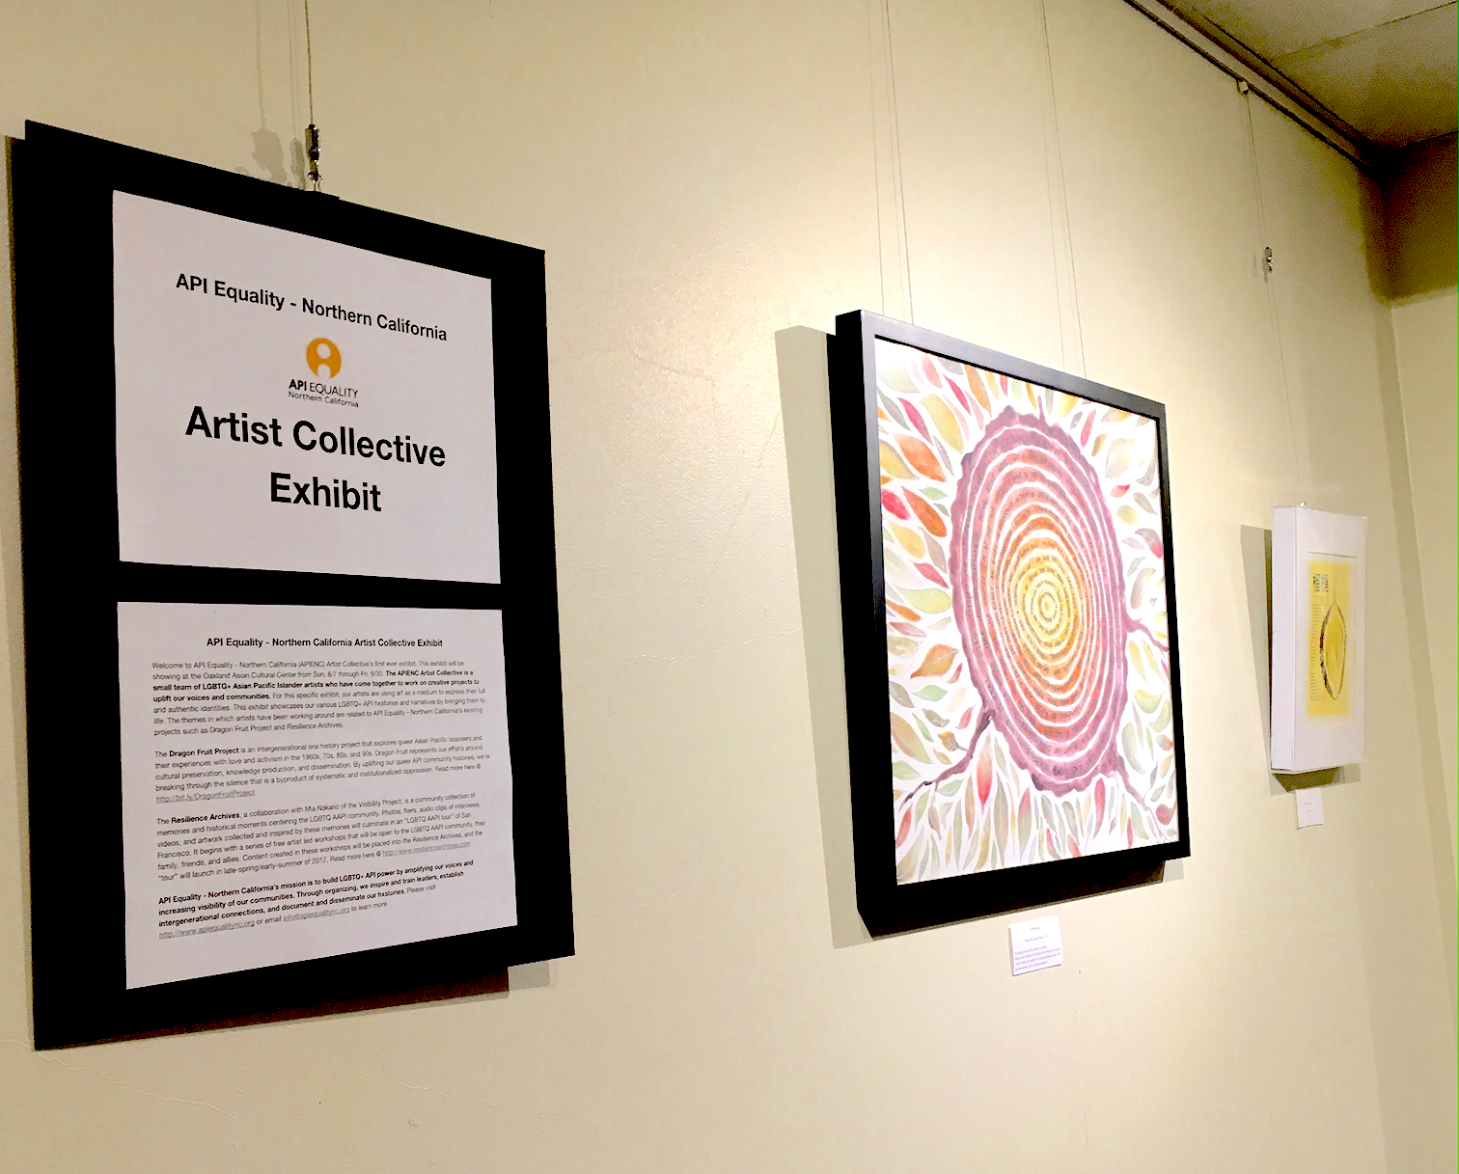 Image Description: The opening section of the Artist Collective exhibit shows three pieces hanging. A statement from APIENC is seen on the left, with a colorful piece in the middle, and a smaller yellow print on the right.